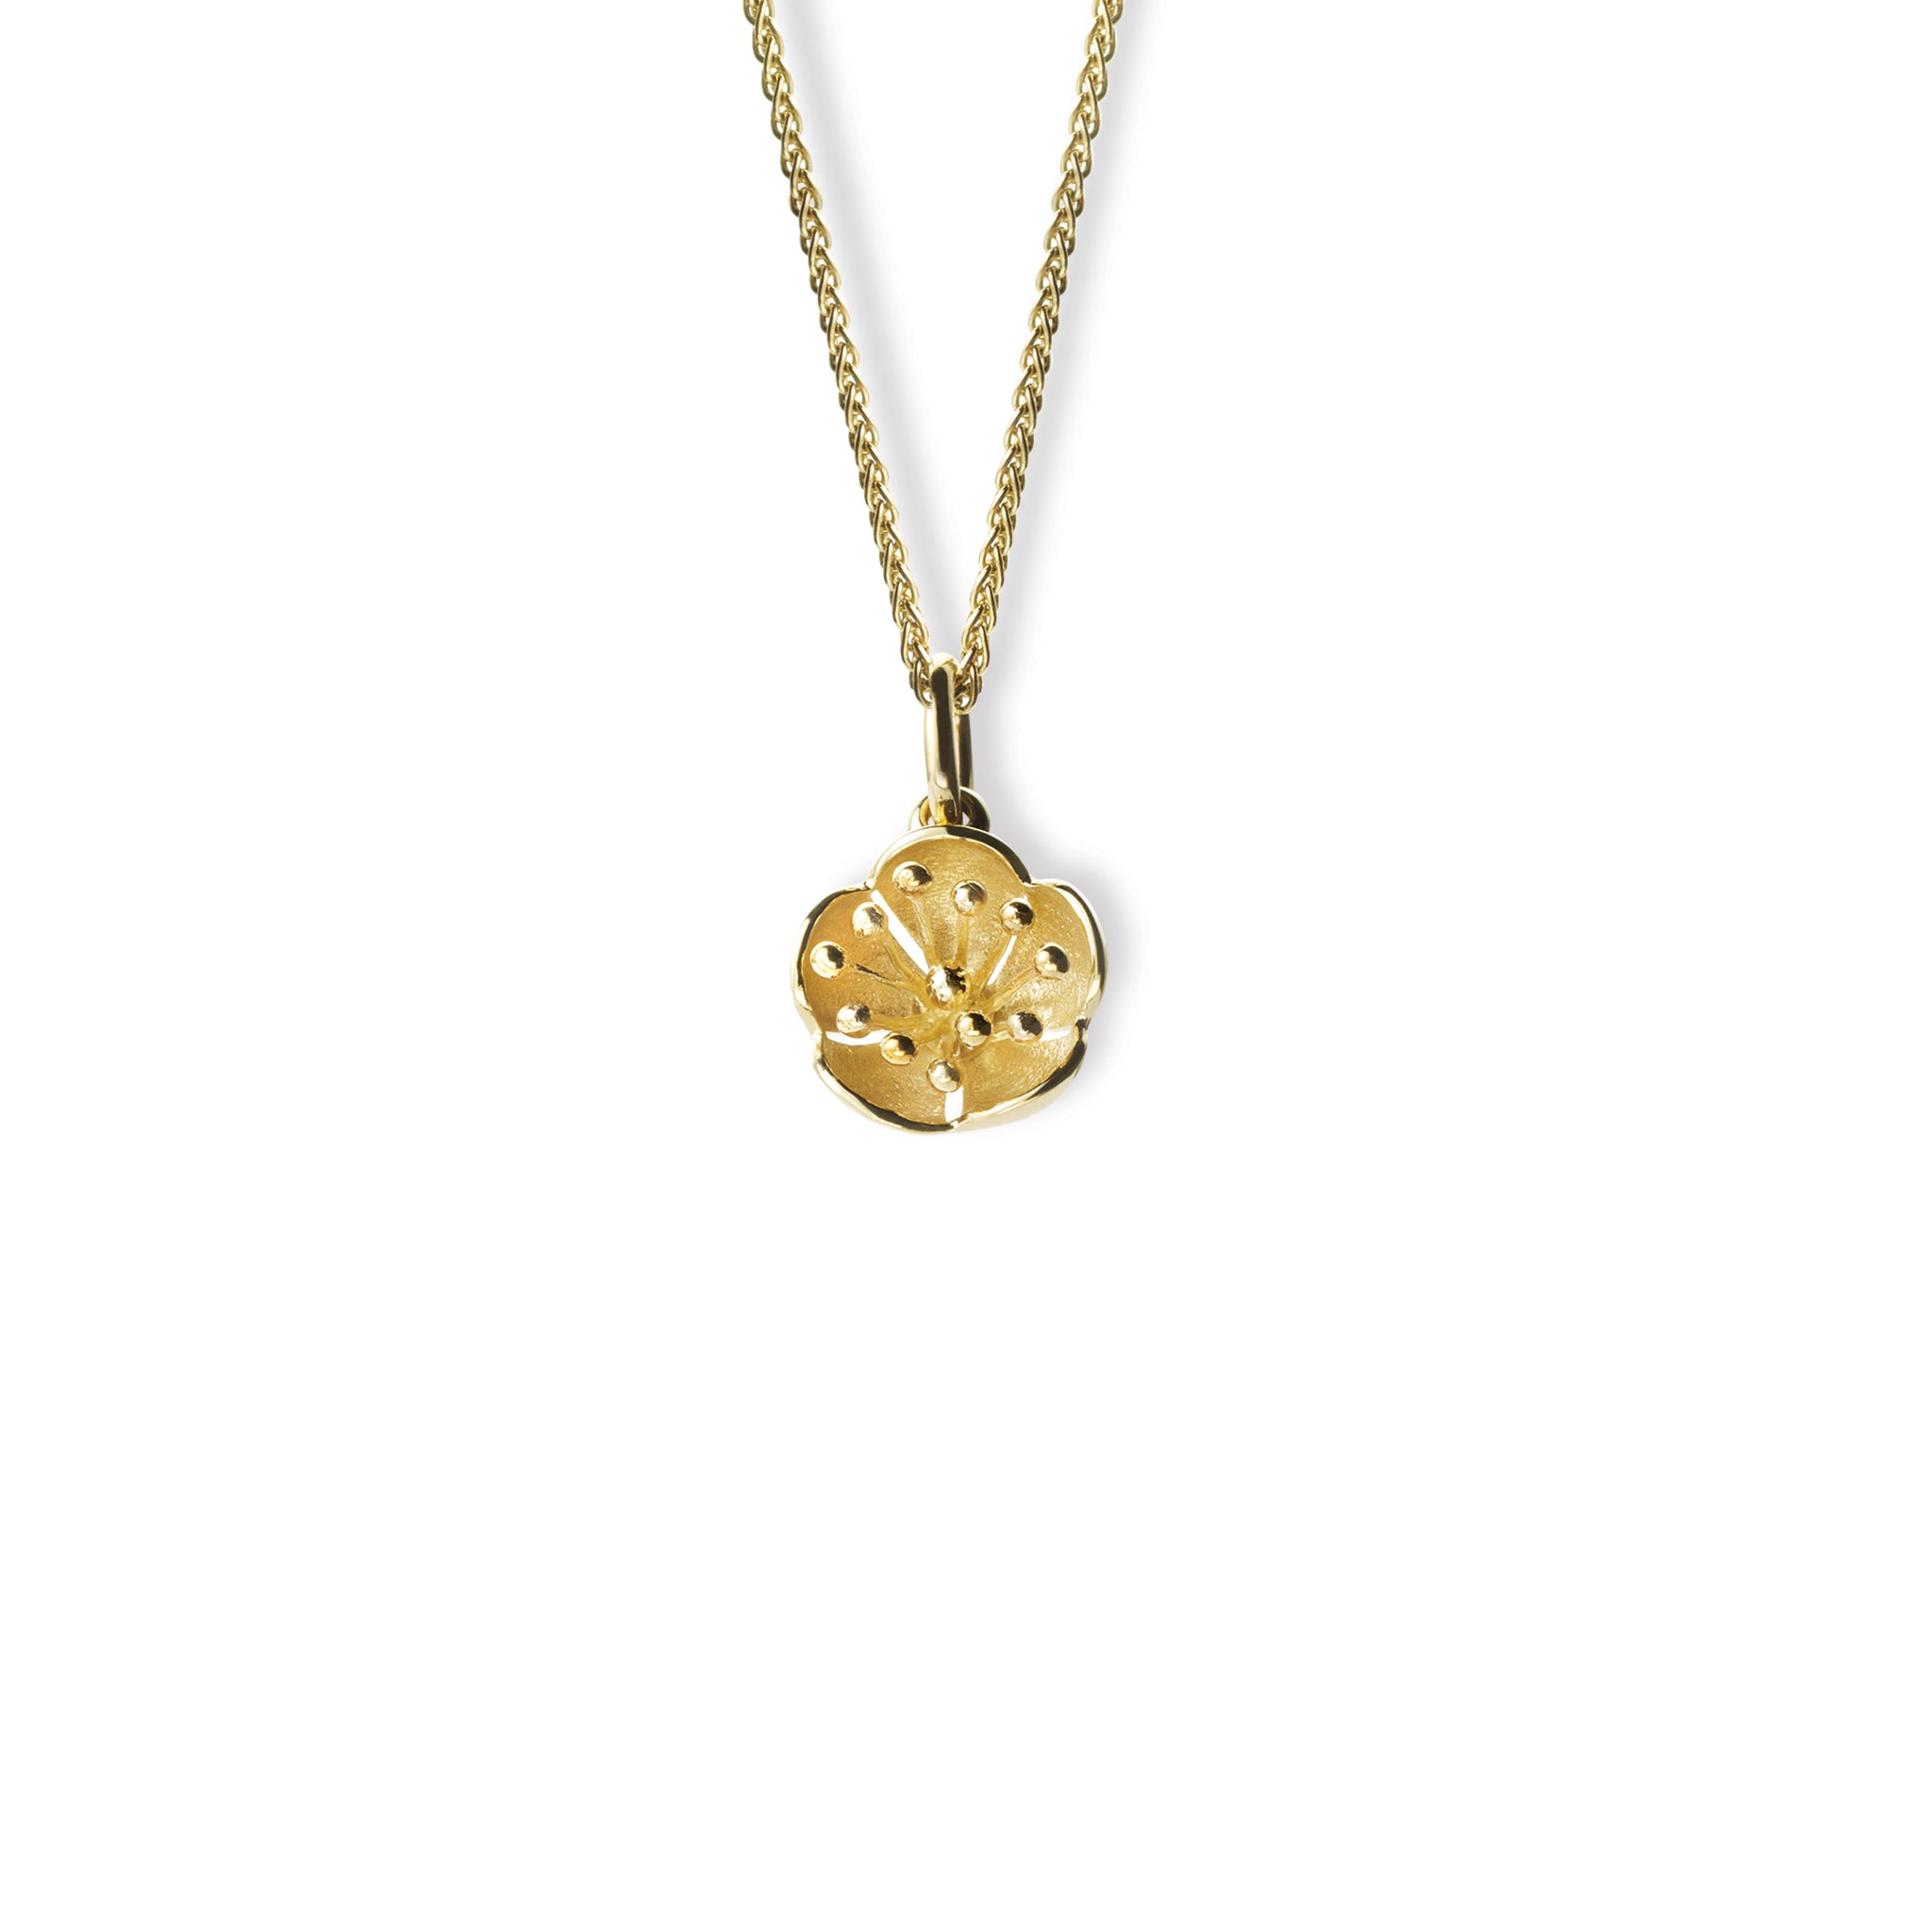 Plum Blossom Large Necklace Pendant Yellow Gold